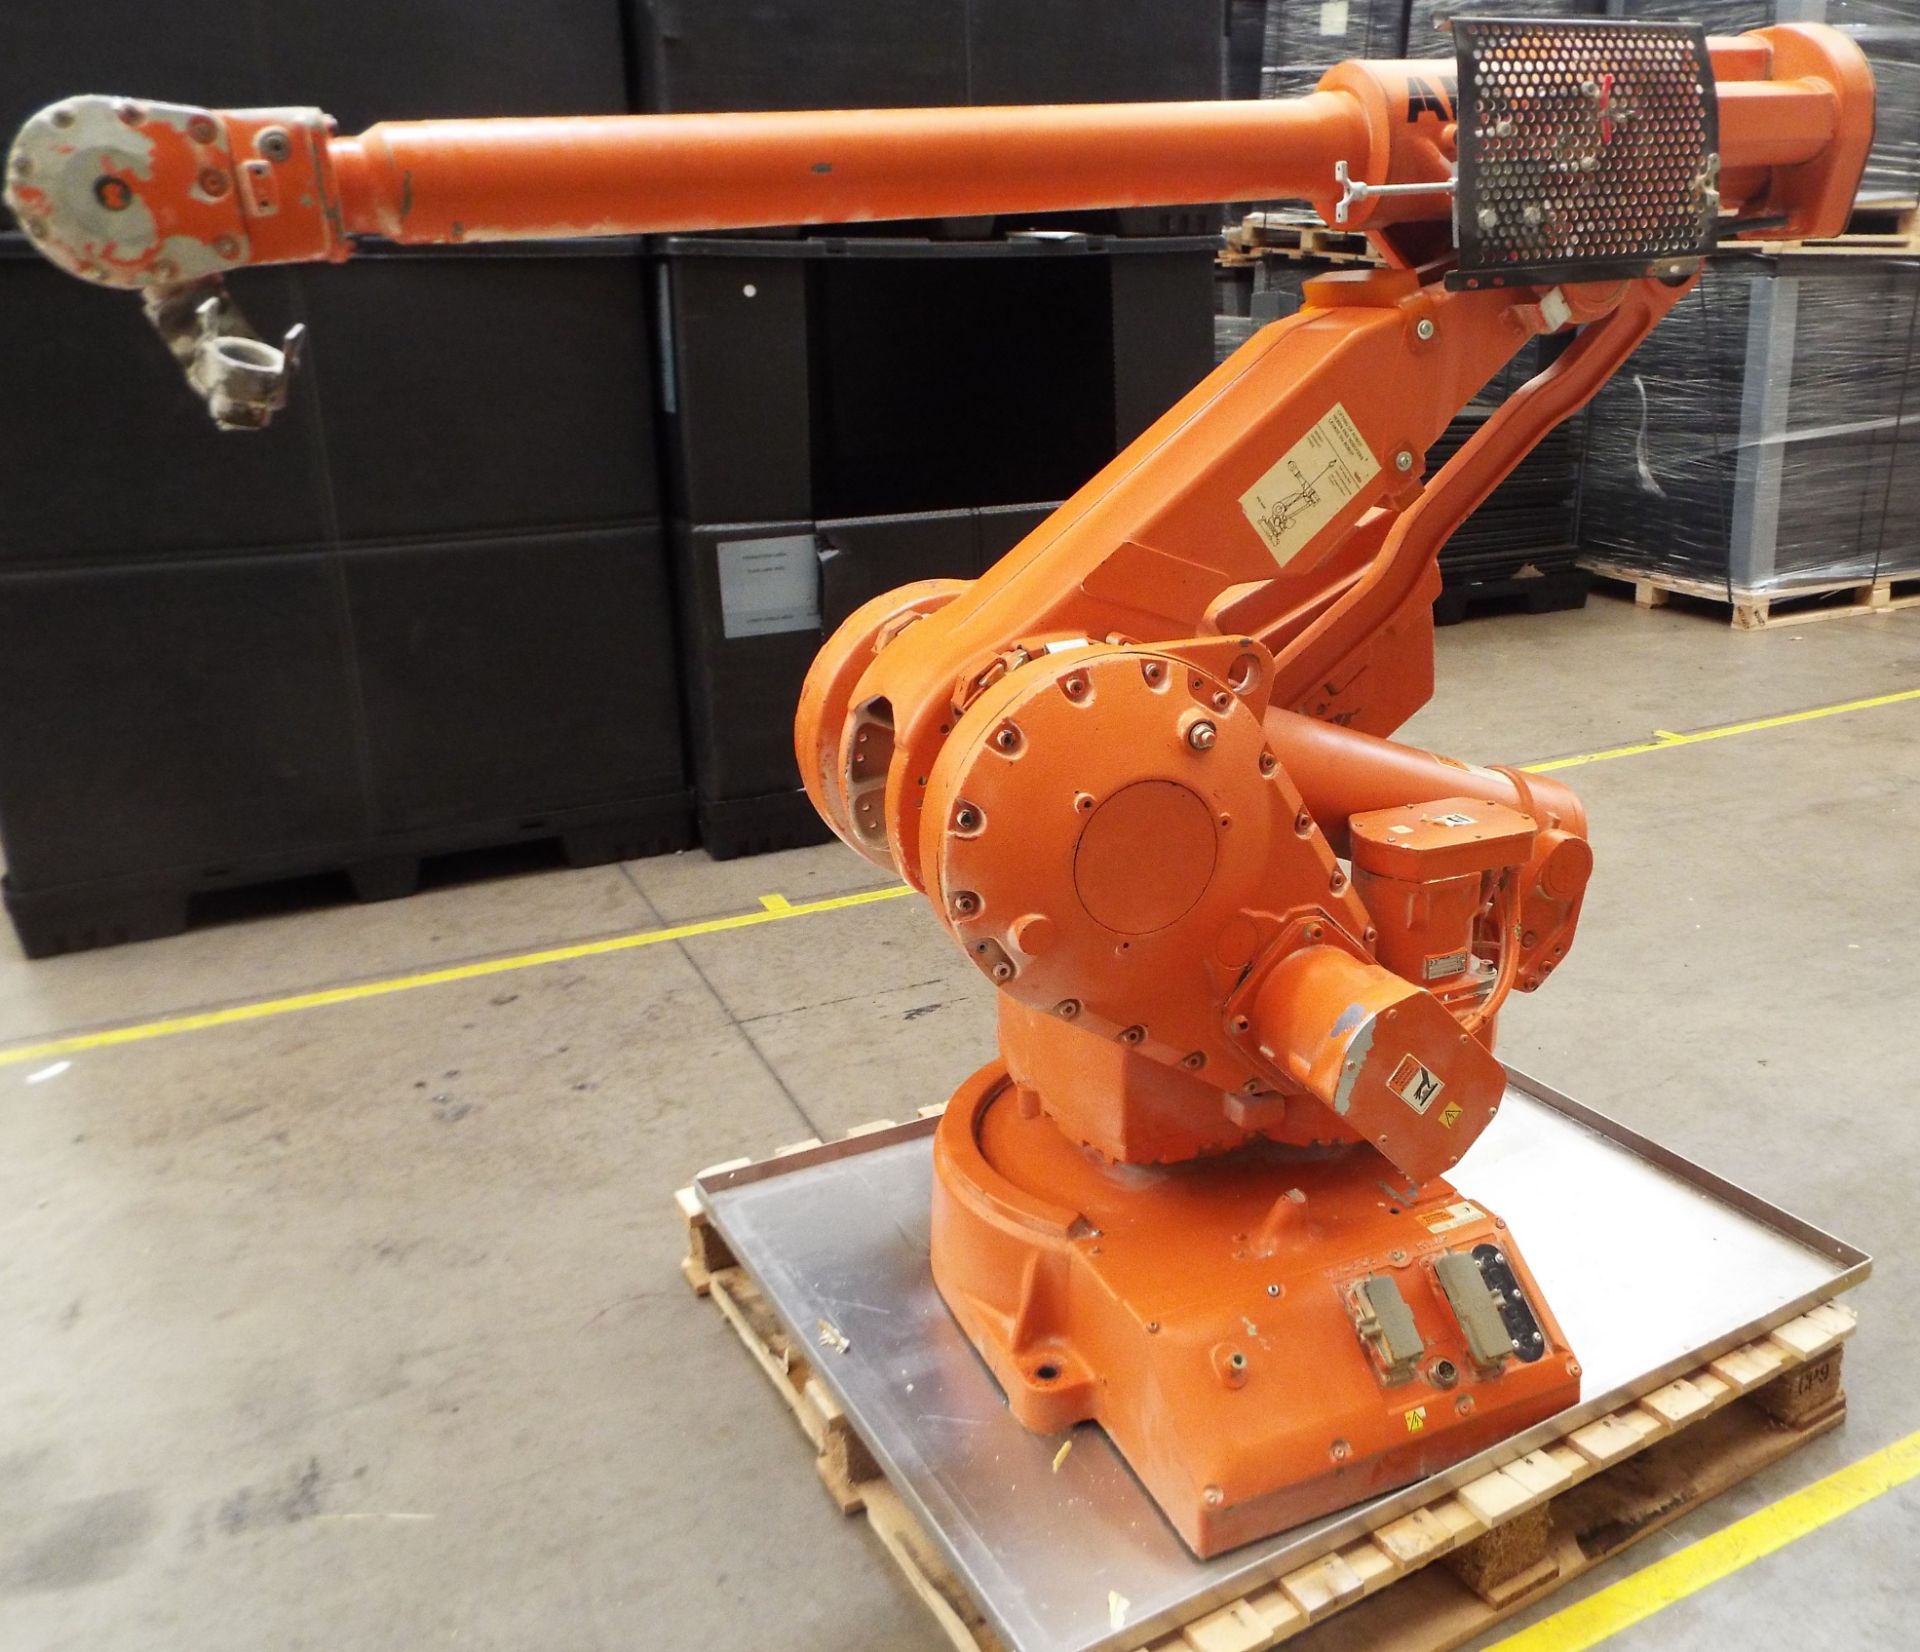 ABB-IRB-4400-M2000 6 Axis Industrial Robot - Image 2 of 13